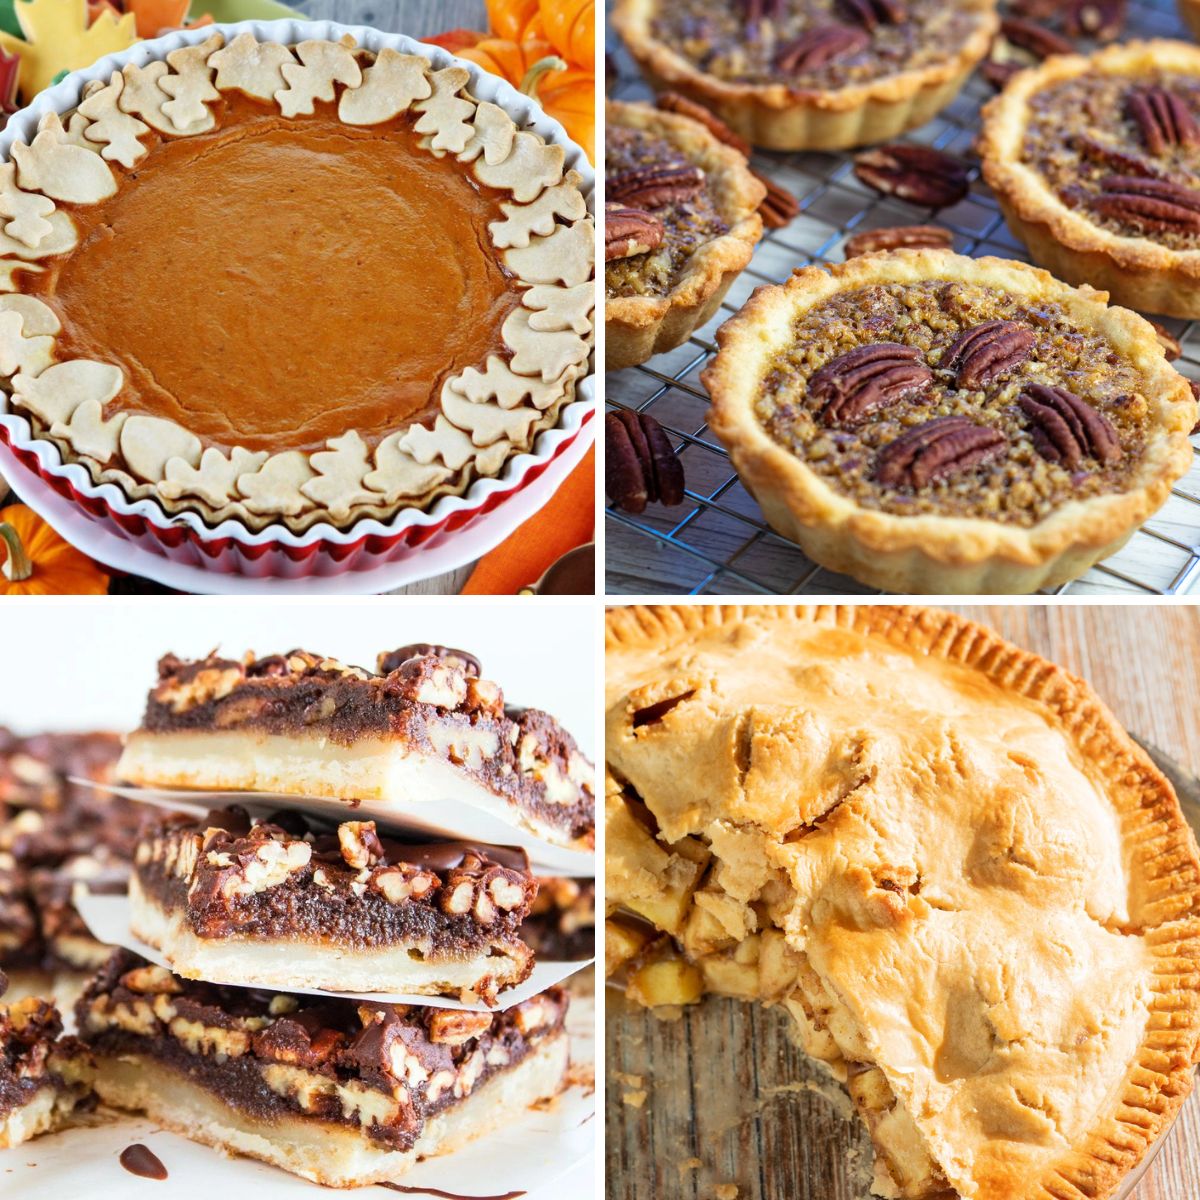 Thanksgiving Pie Recipes: Pumpkin Pie Without Evaporated Milk (+More Great Pies To Bake!)